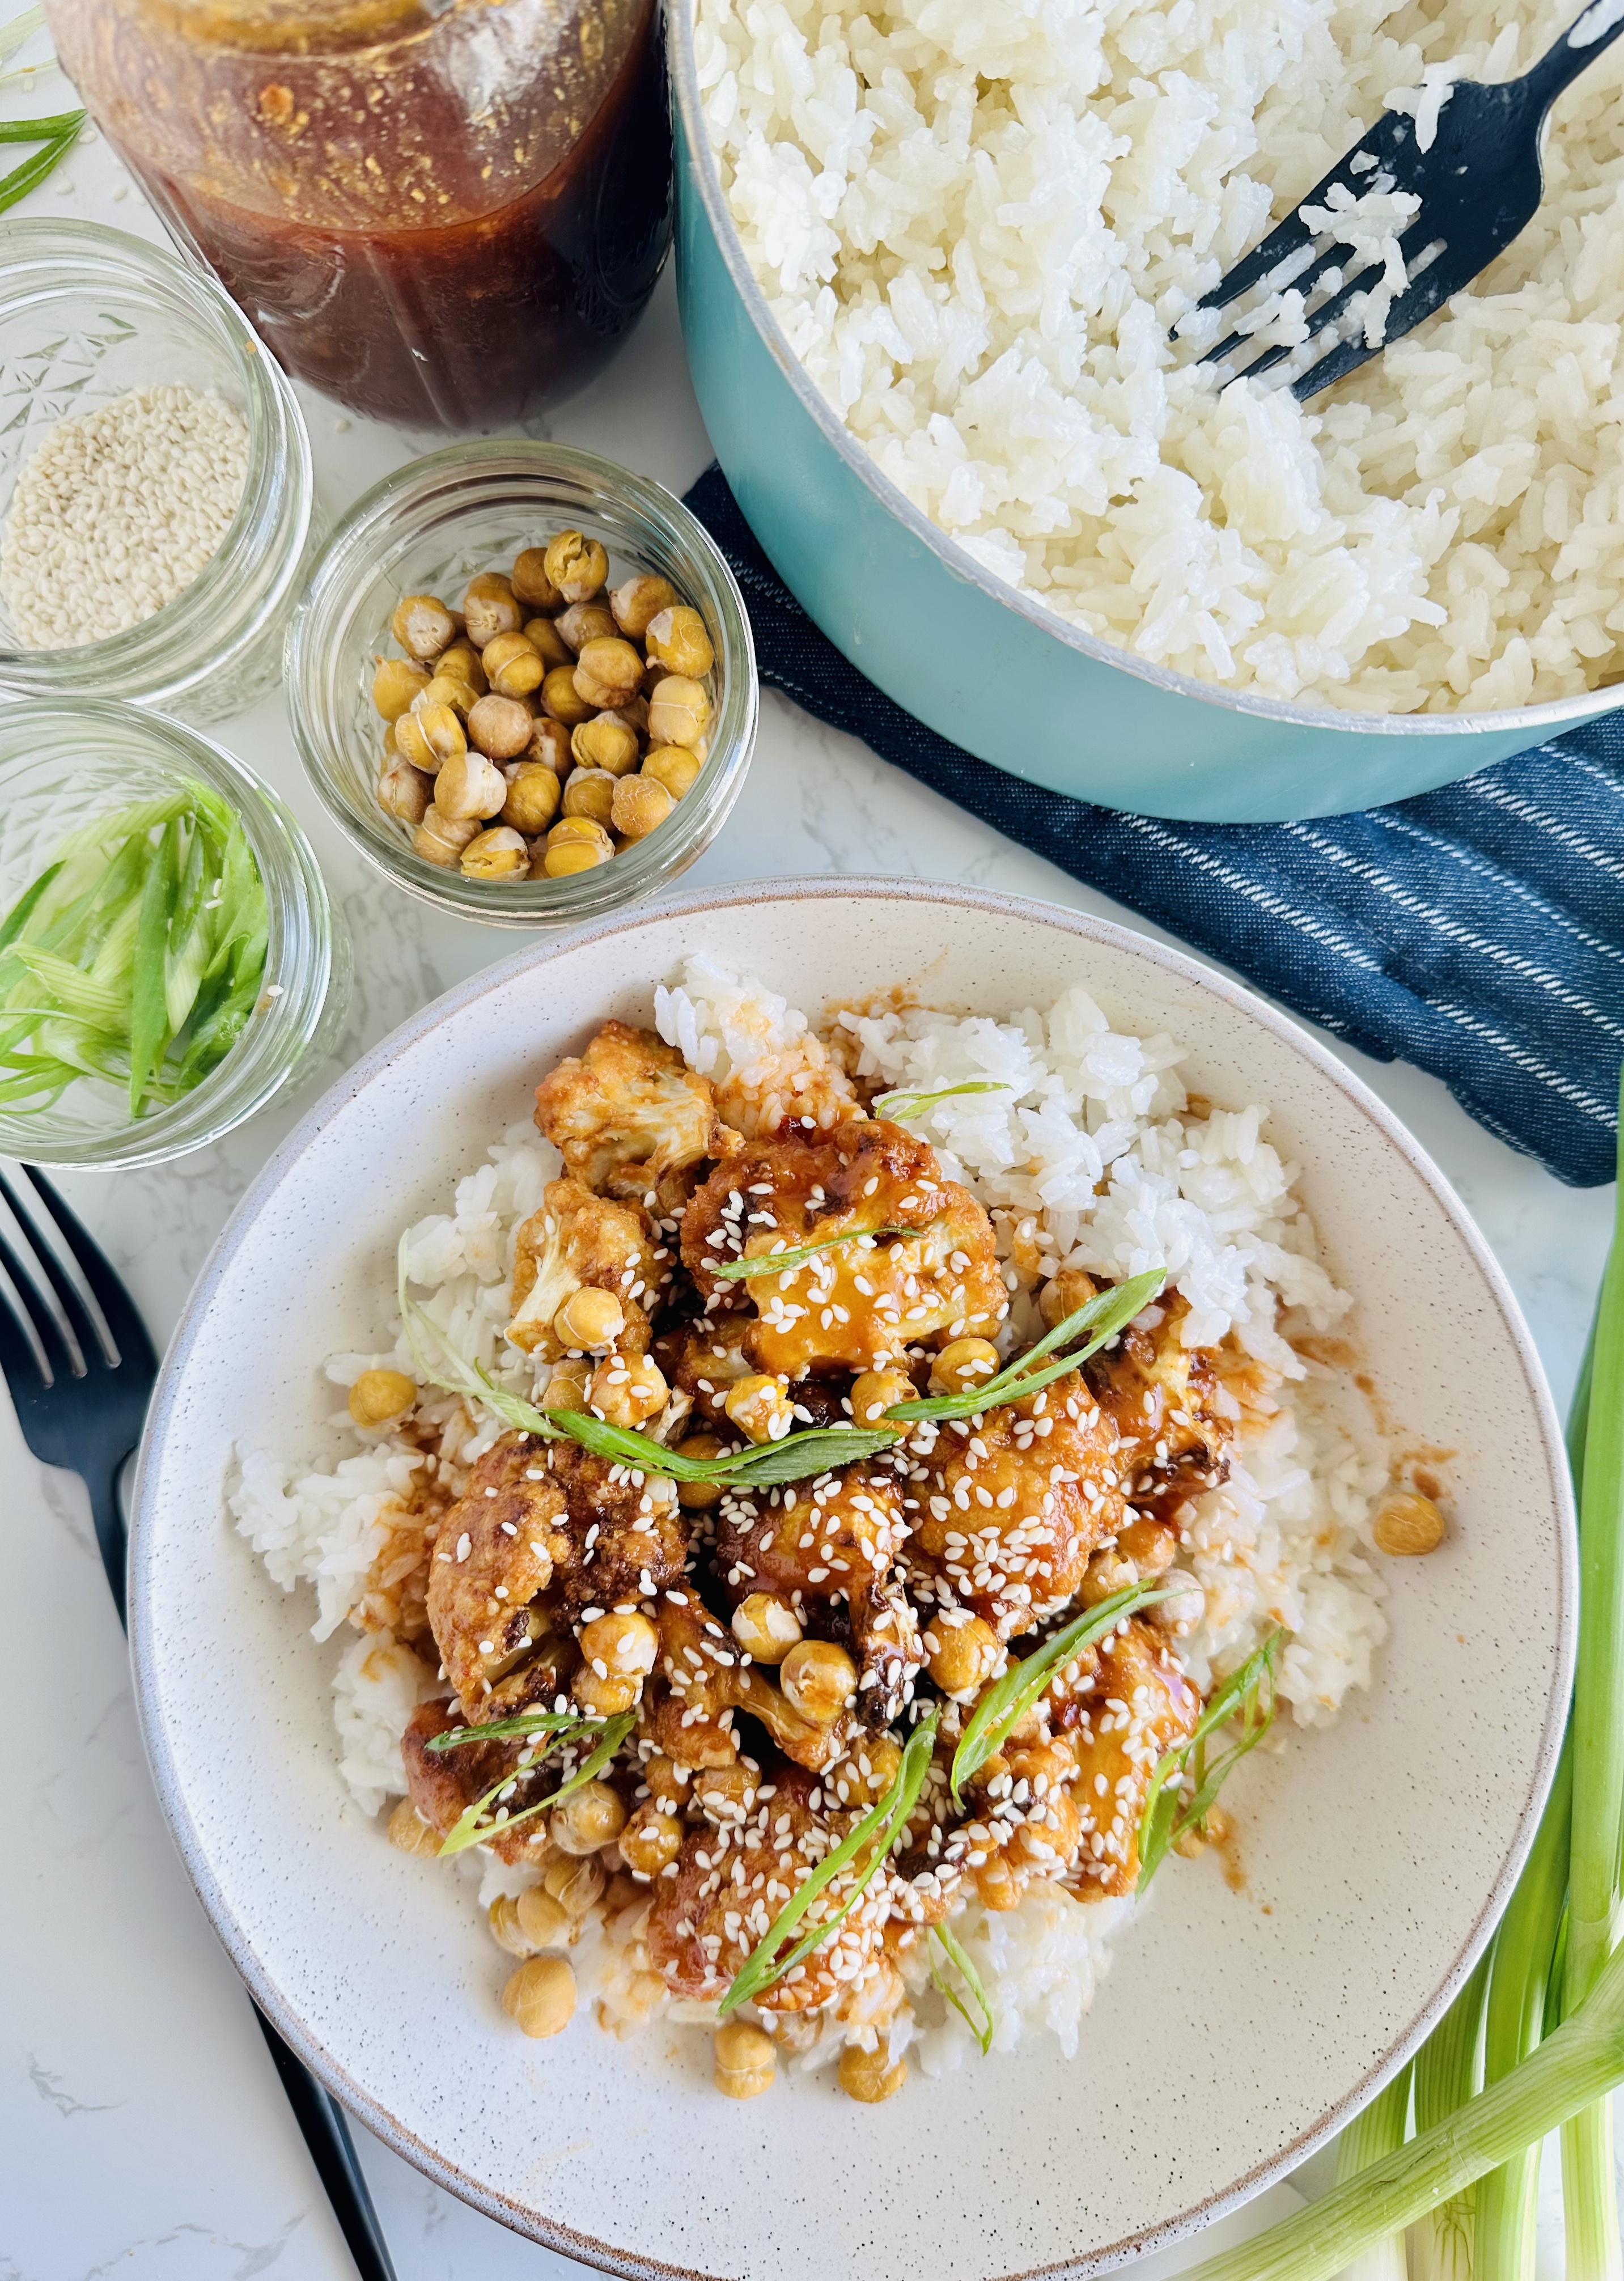 Roasted Chickpeas and Cauliflower with Sesame Sauce